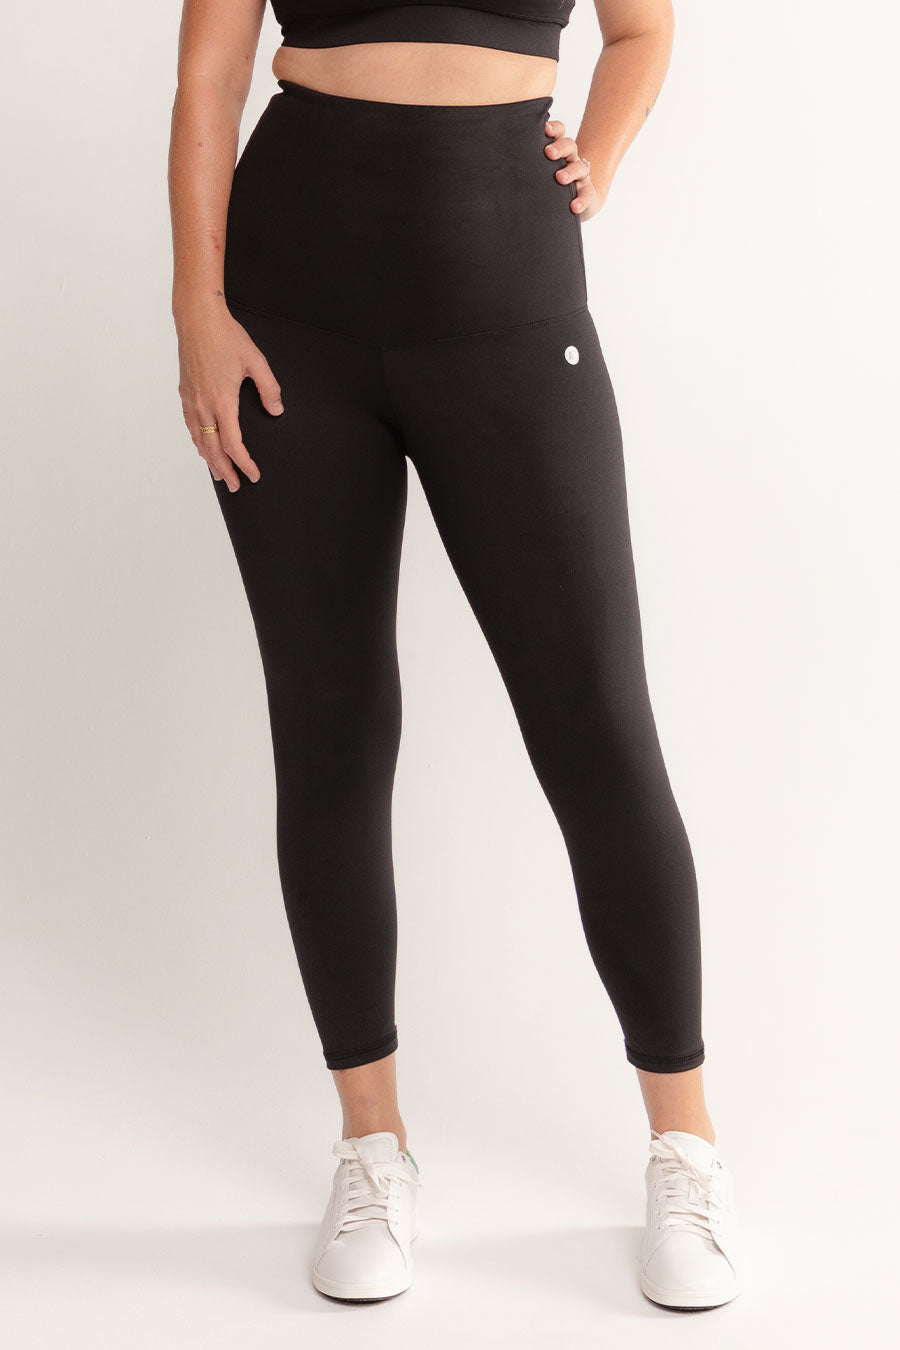 Recovery Support 7/8 Length Tight - Black